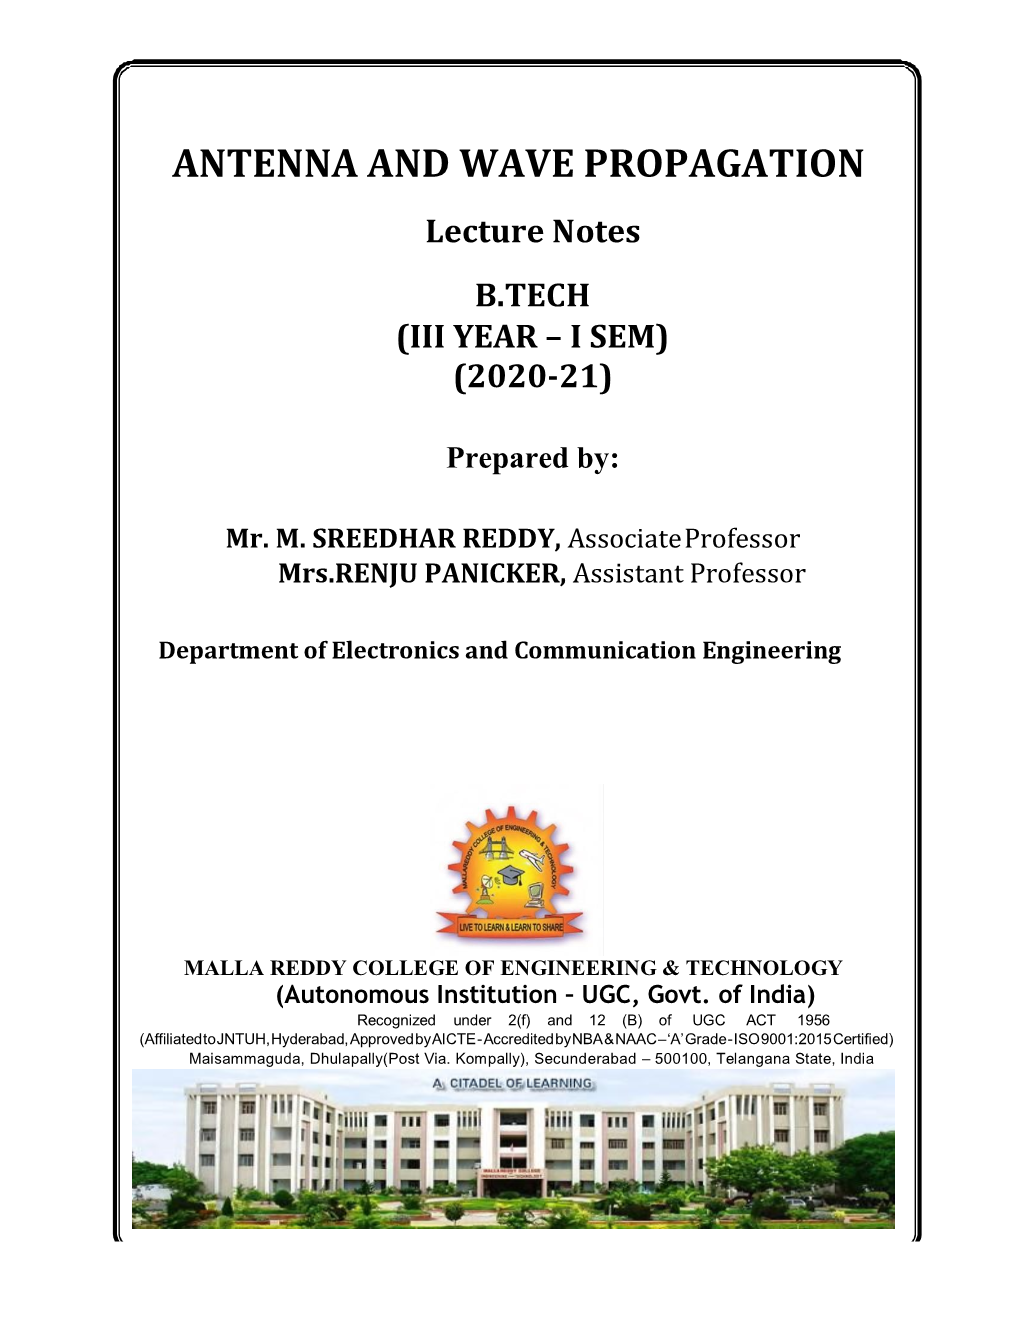 ANTENNA and WAVE PROPAGATION Lecture Notes B.TECH (III YEAR – I SEM) (2020-21)